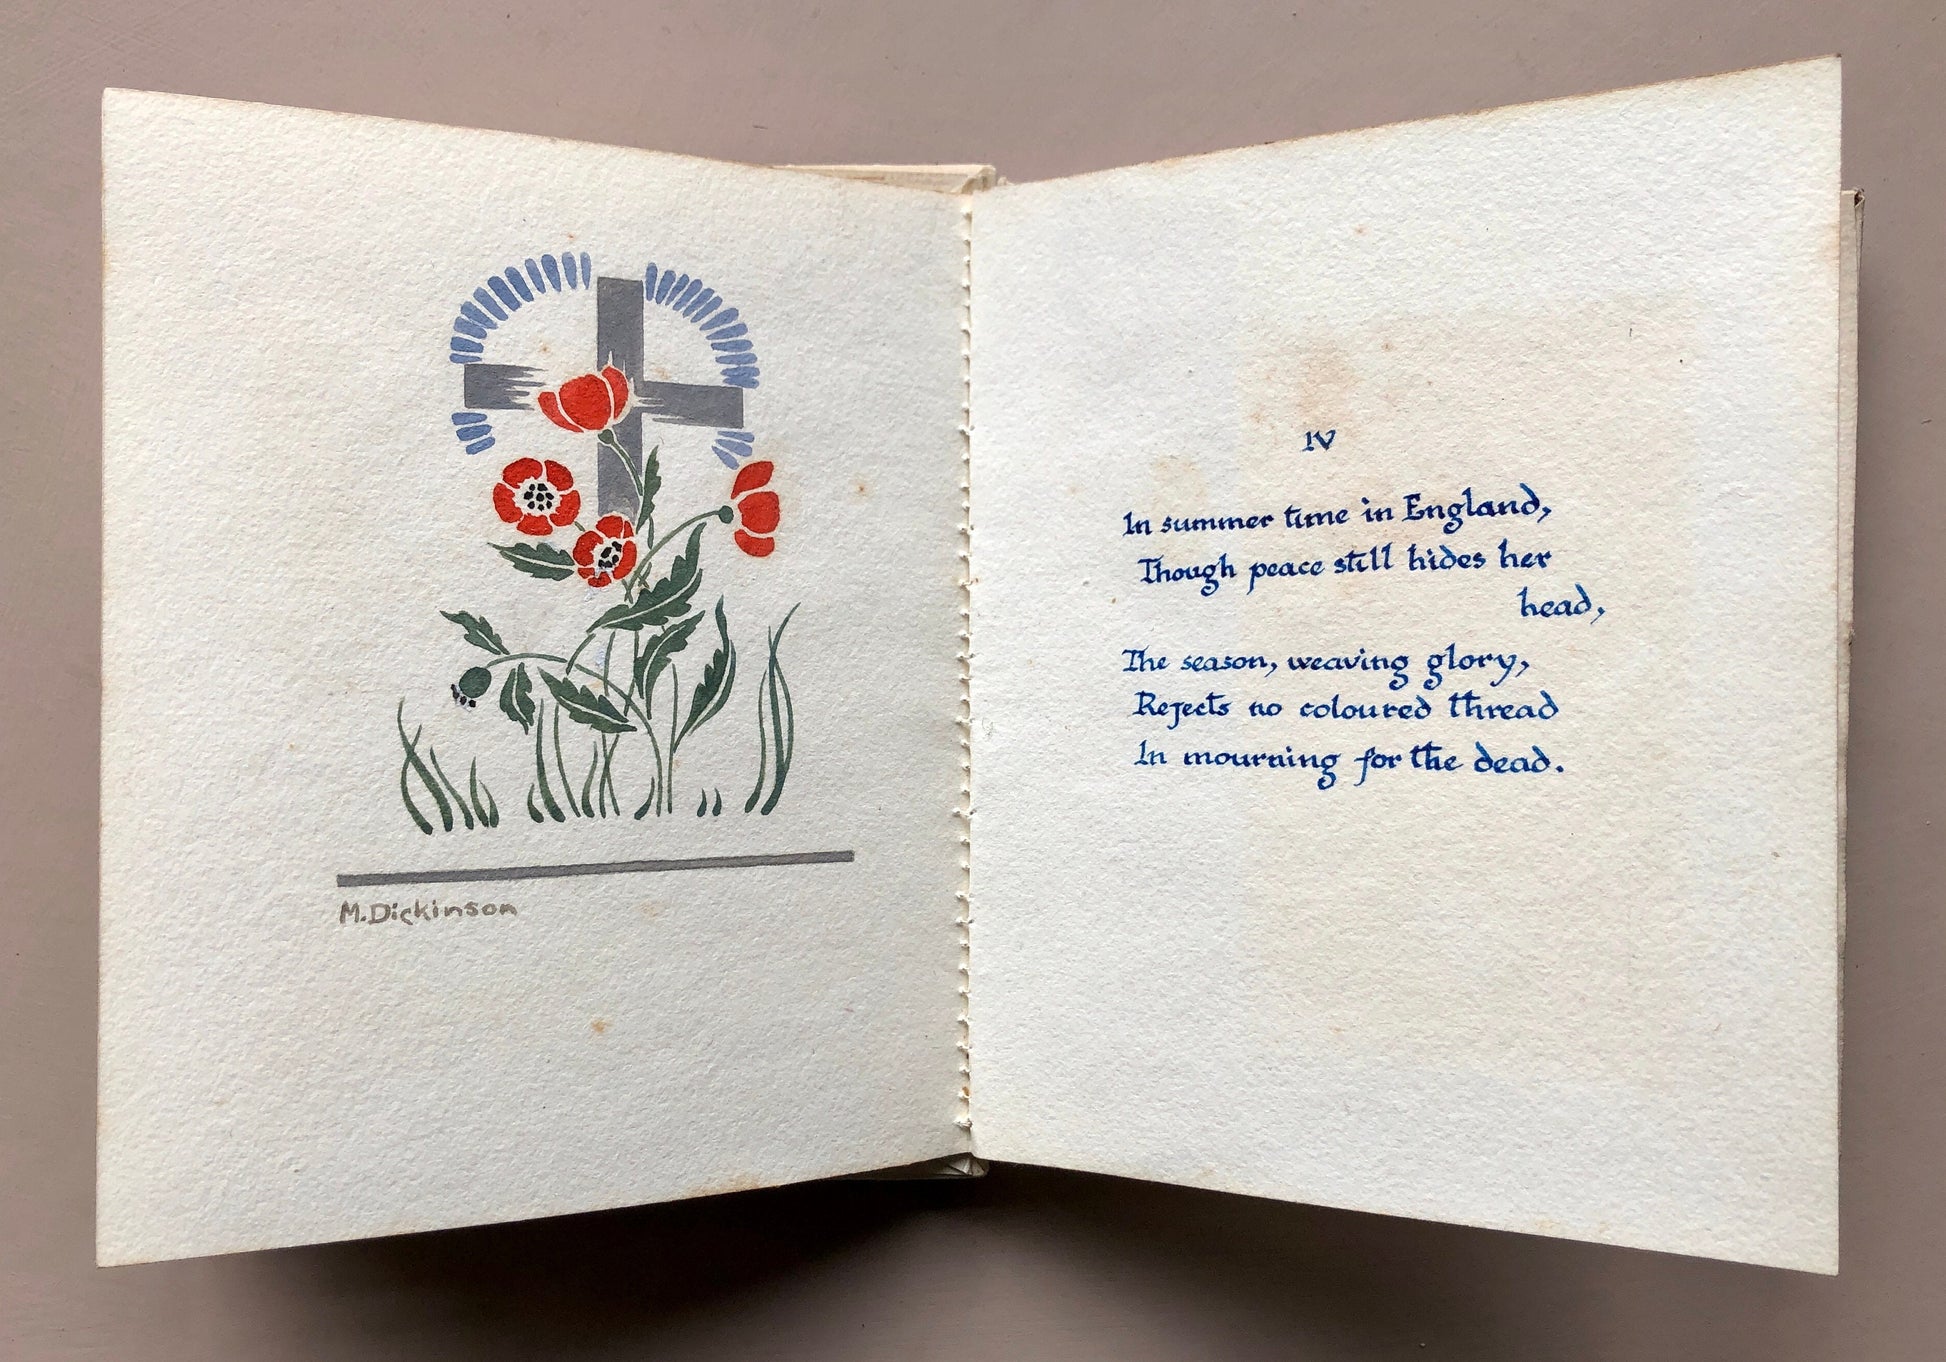 Summer in War-Time by Allan MacDonald Laing. A handmade book with poem amd watercolour illustrations by M. Dickinson. 15 x 12.5 cms.